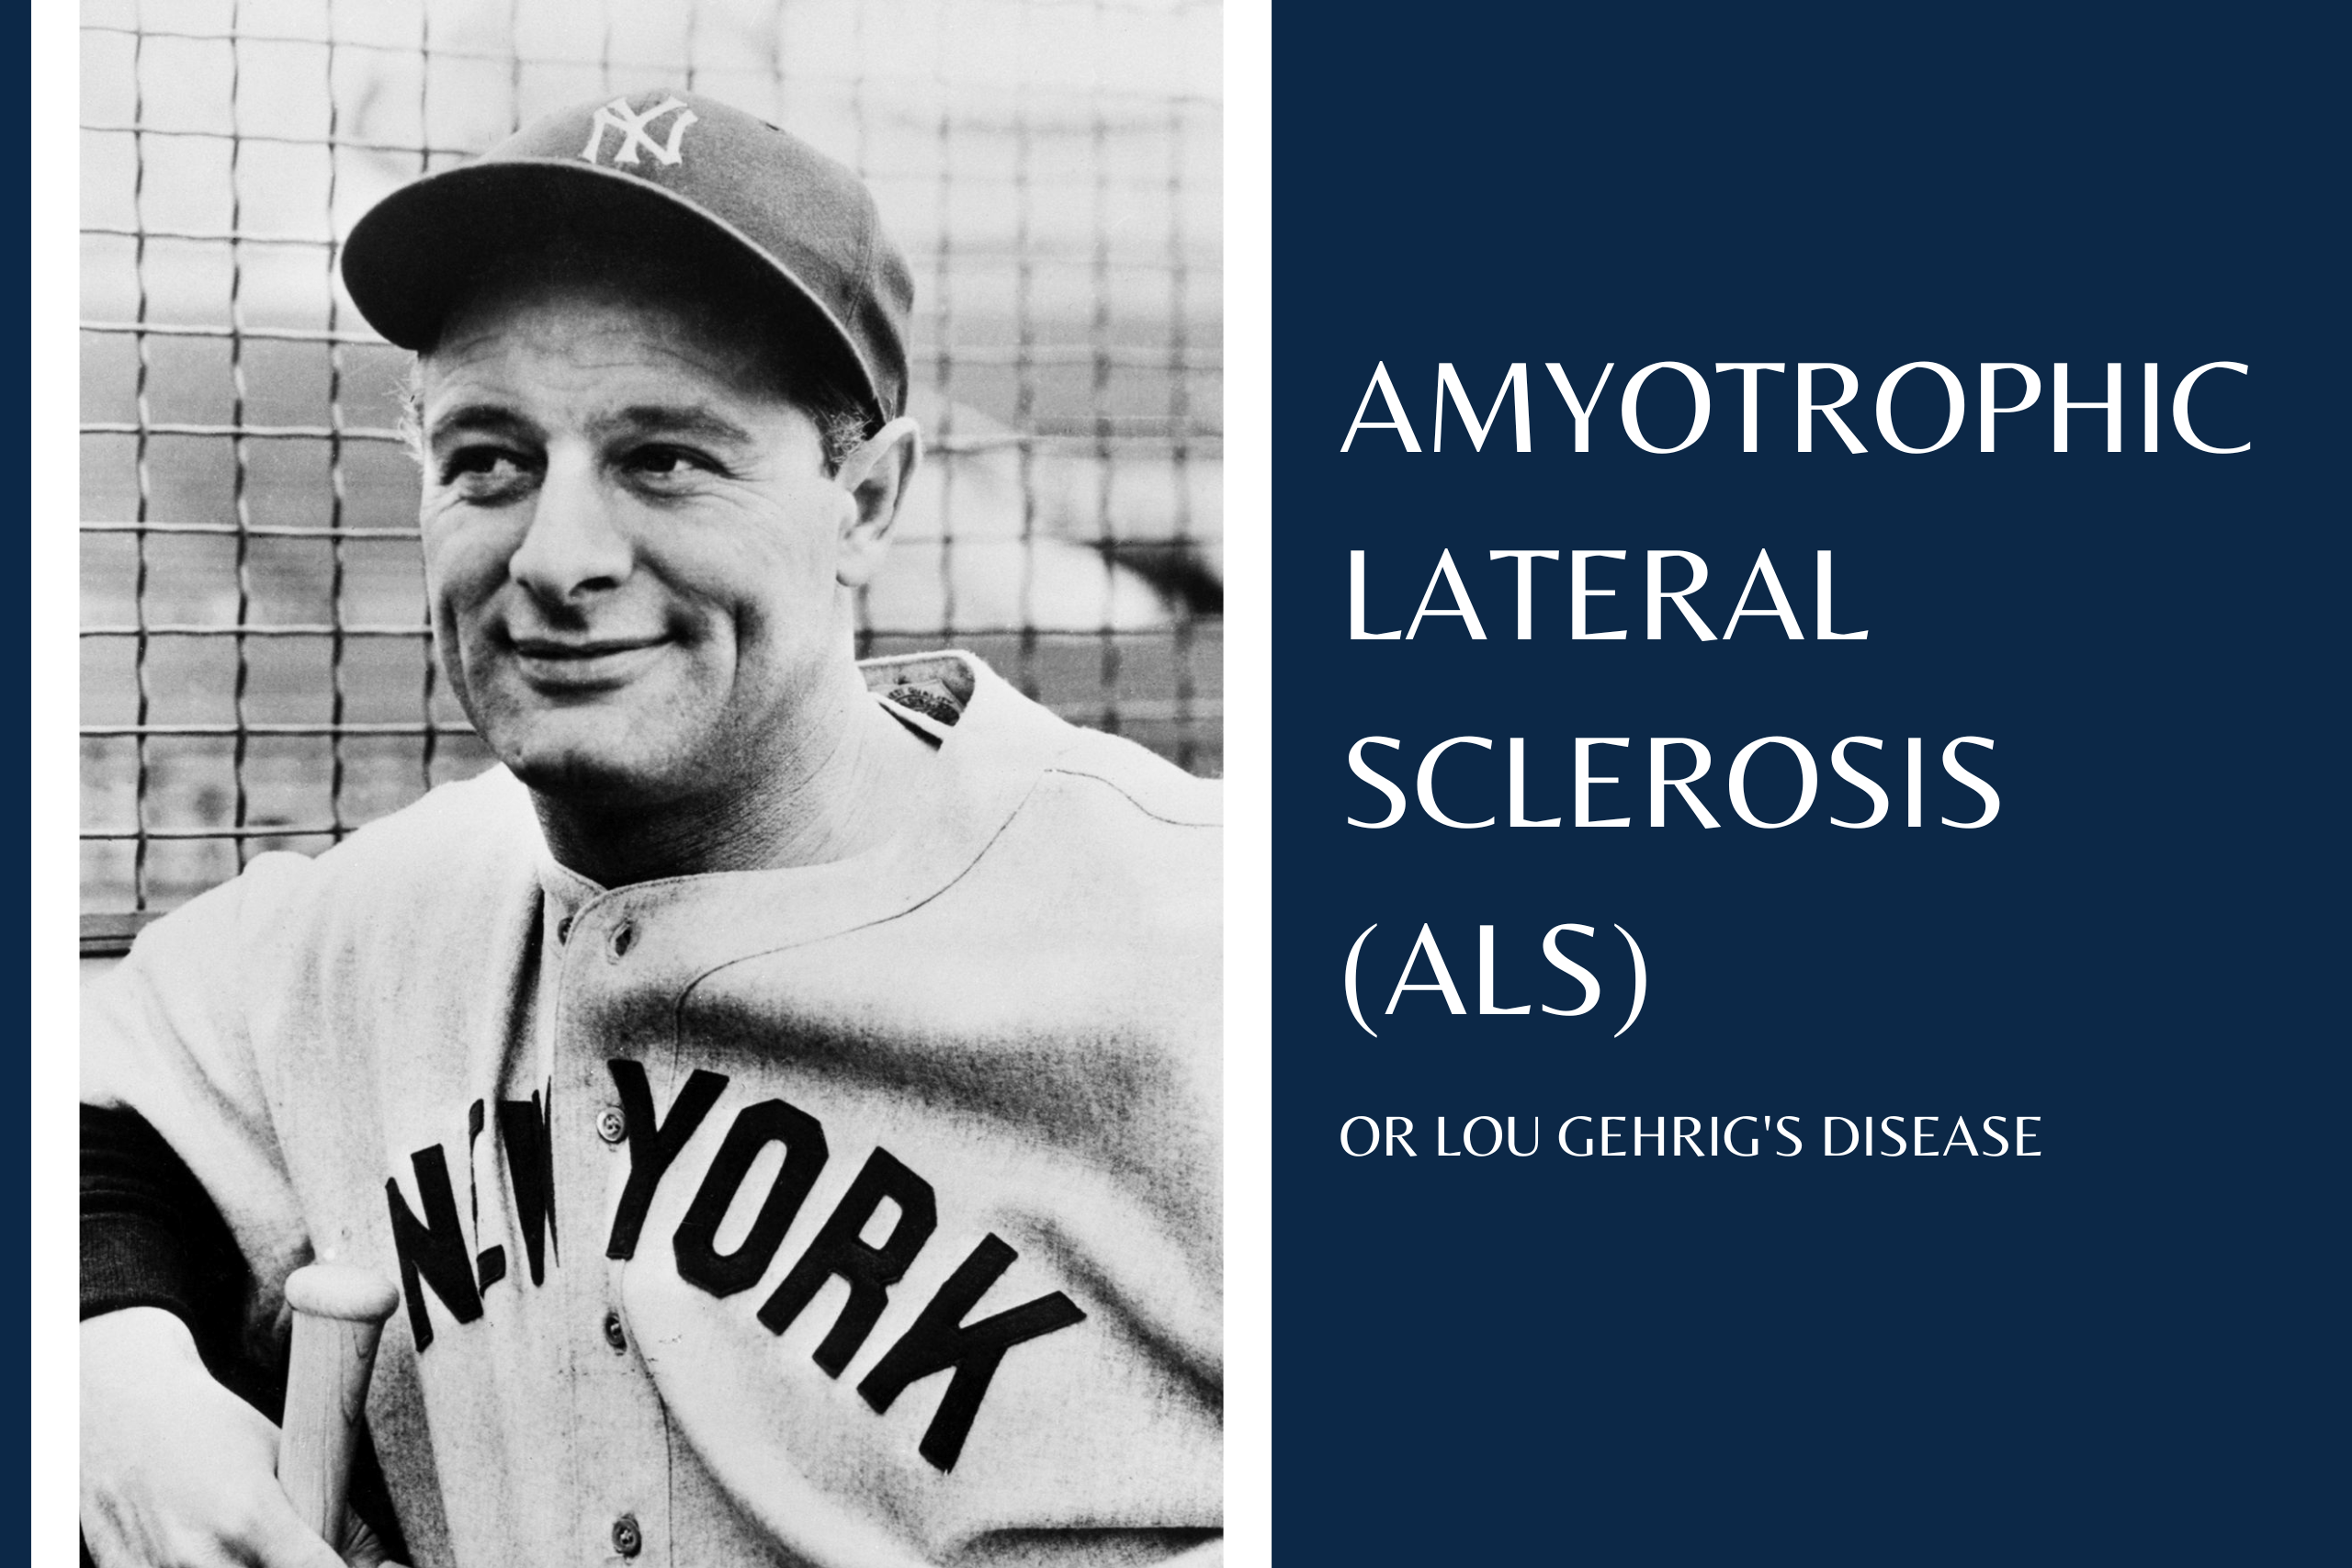 ALS also known as Lou Gehrig’s Disease is much more common than you think.